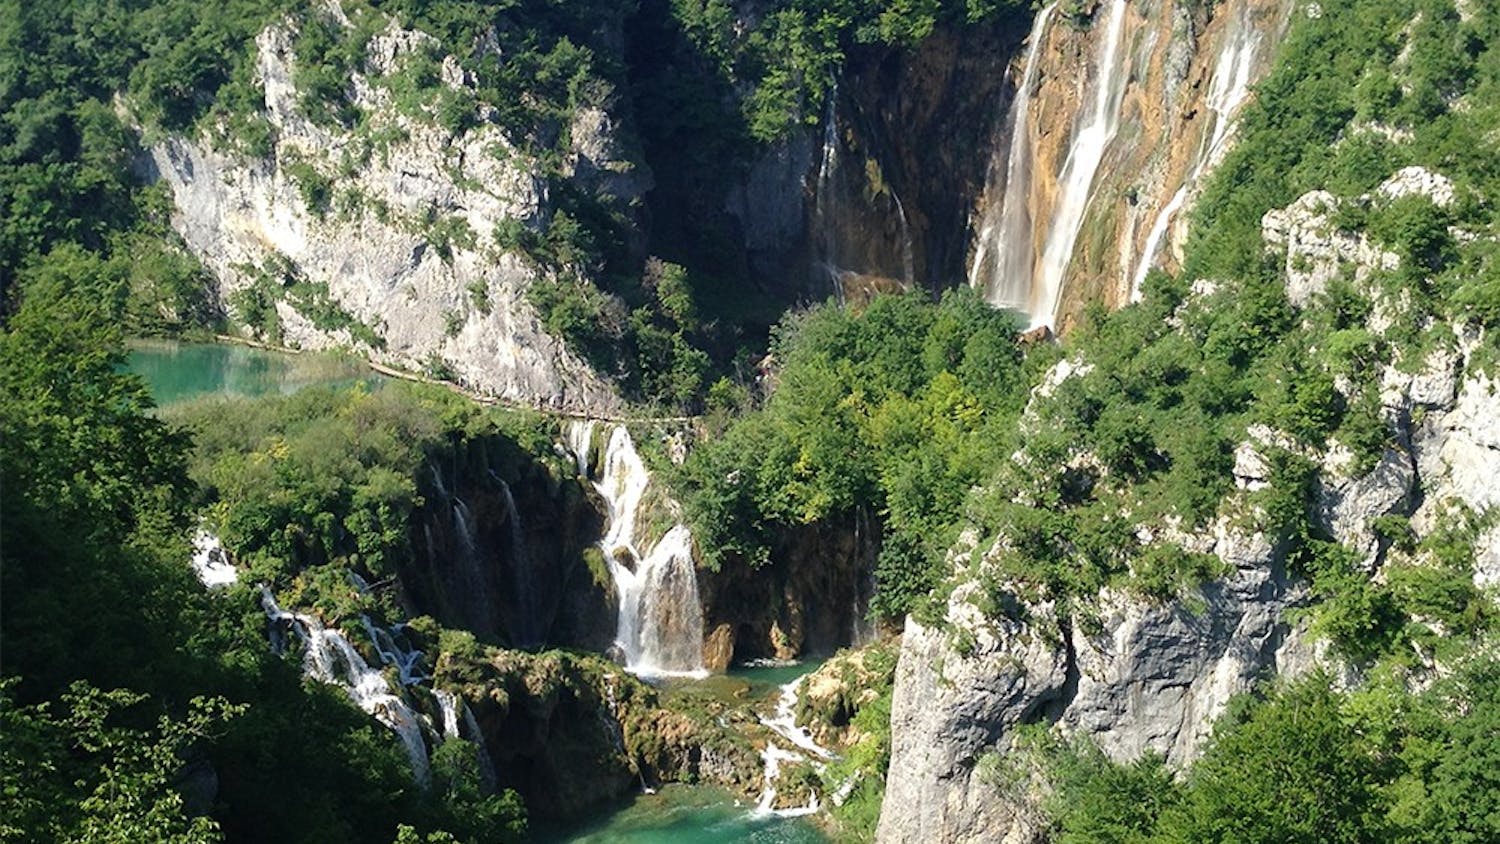 The Veliki Slap, the largest waterfall at Plitvice Lakes National Park, is 78 meters high. It is the culminating view of the five-hour hike around the park and the main attraction at Plitvice.